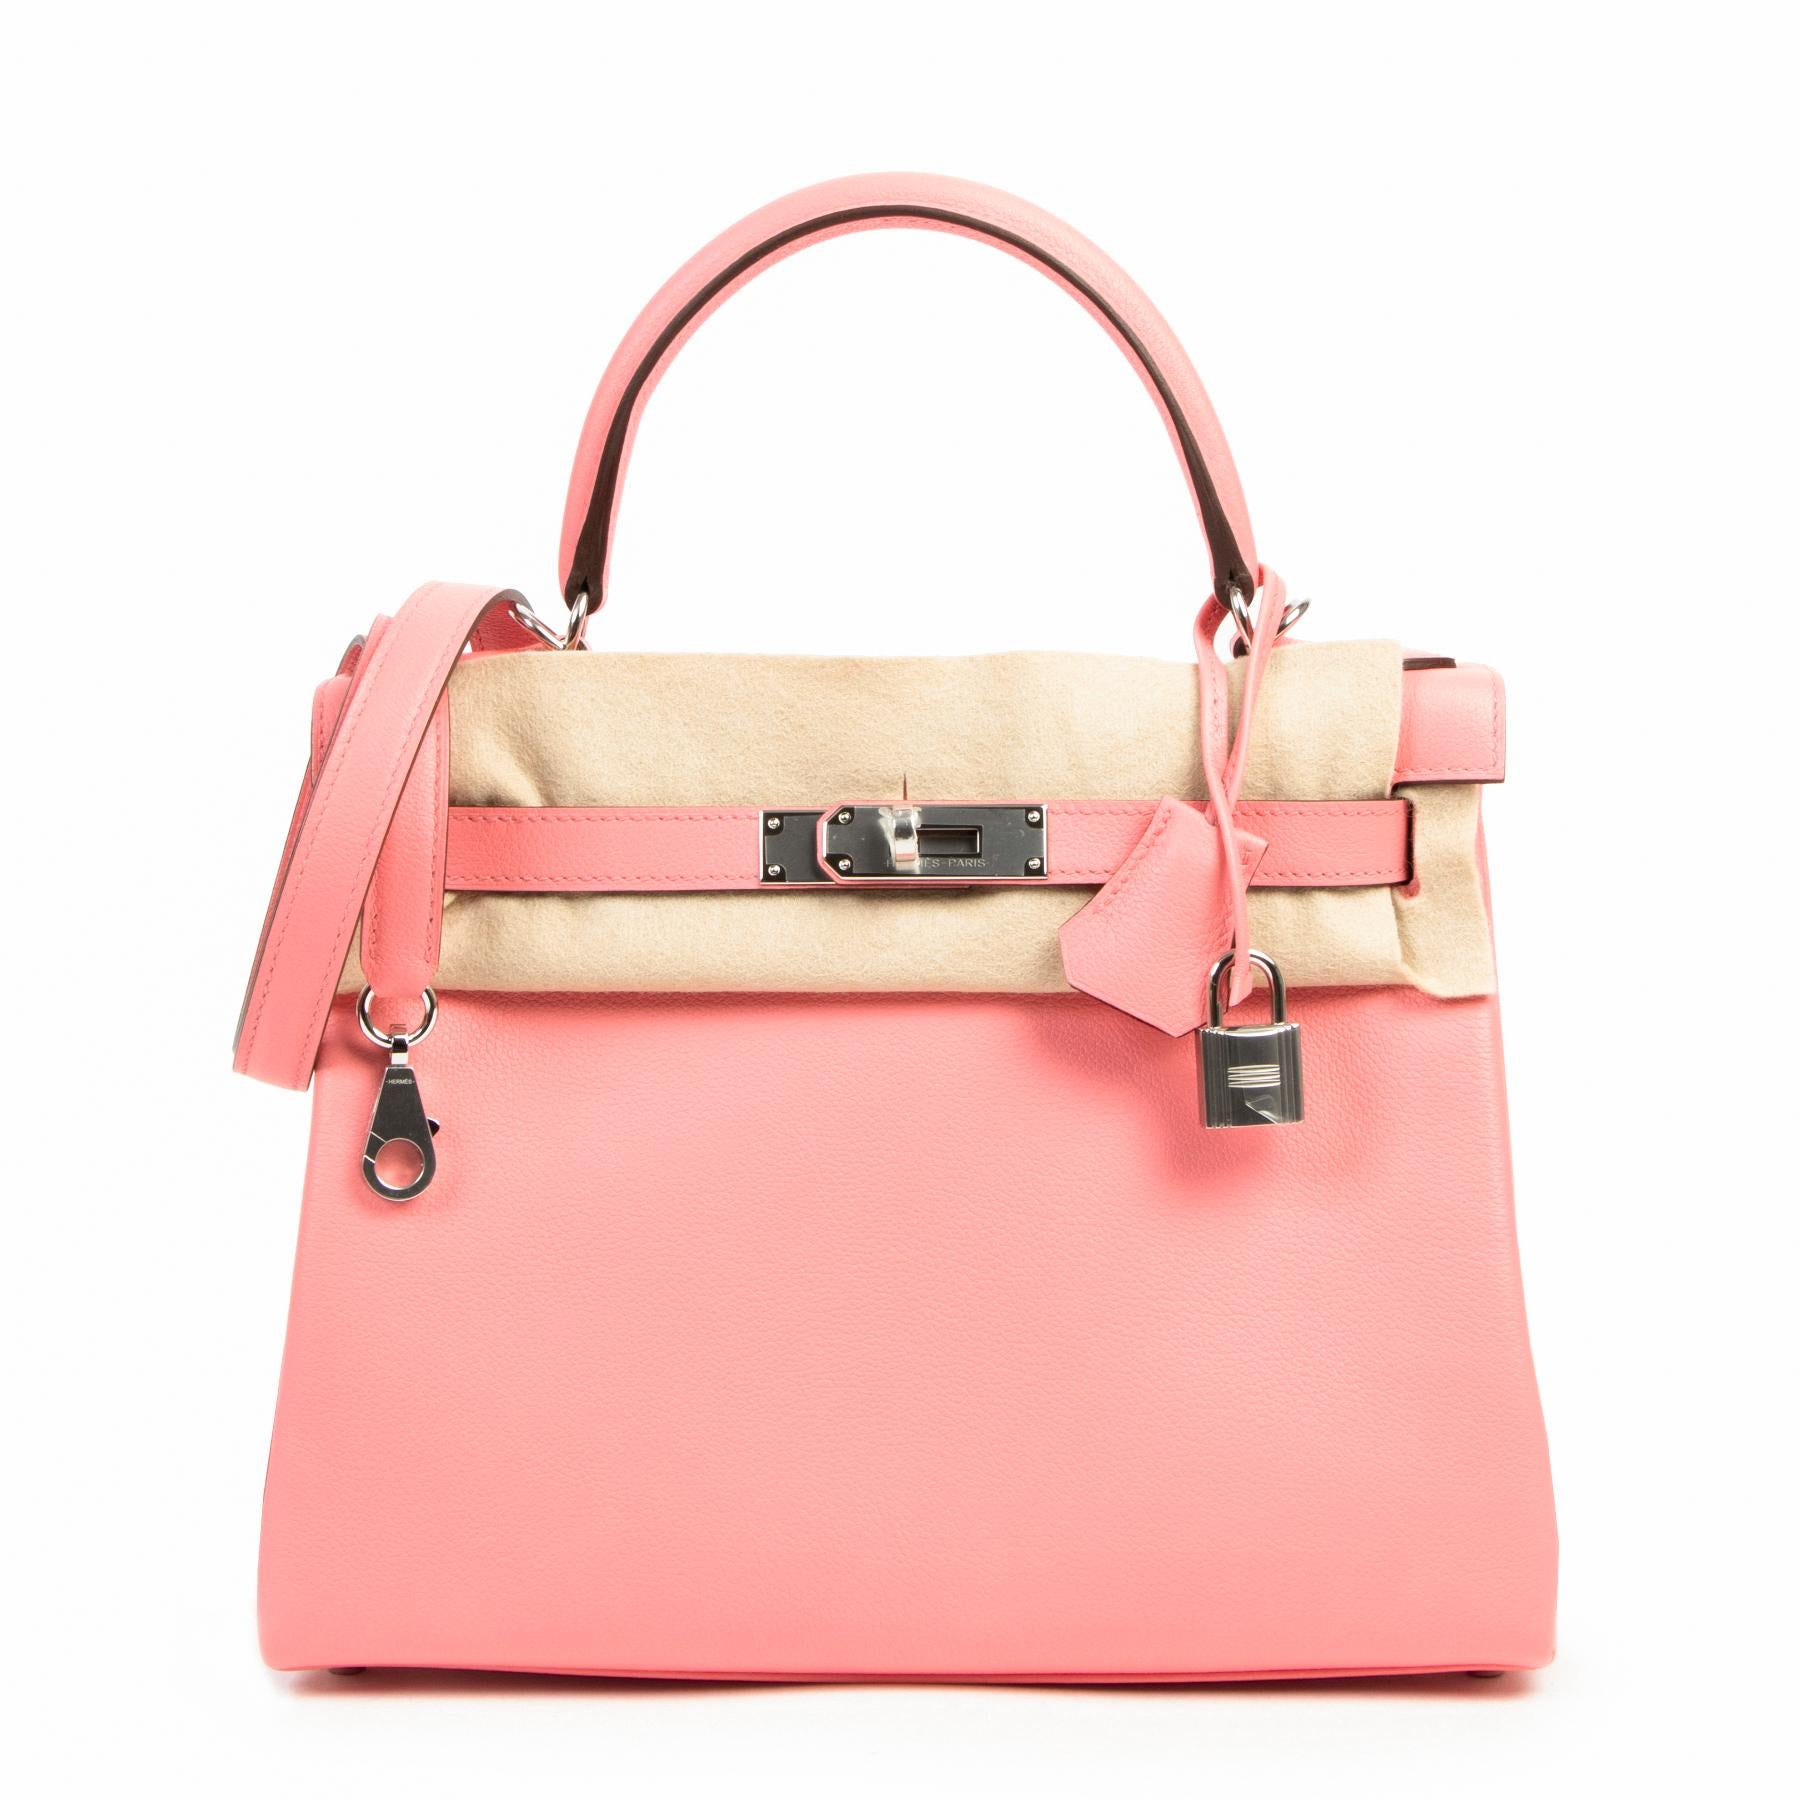 Never Used Hermes Kelly 28 Evercolor Rose D'été & Rouge Exotique Lining PHW

This stunning and eyecatching Kelly bag by Hermès comes in 'Rose d'Eté' evercolor leather and  contrasting Rose Exotique lining. 
Summer Rose is a sweet light pink in a